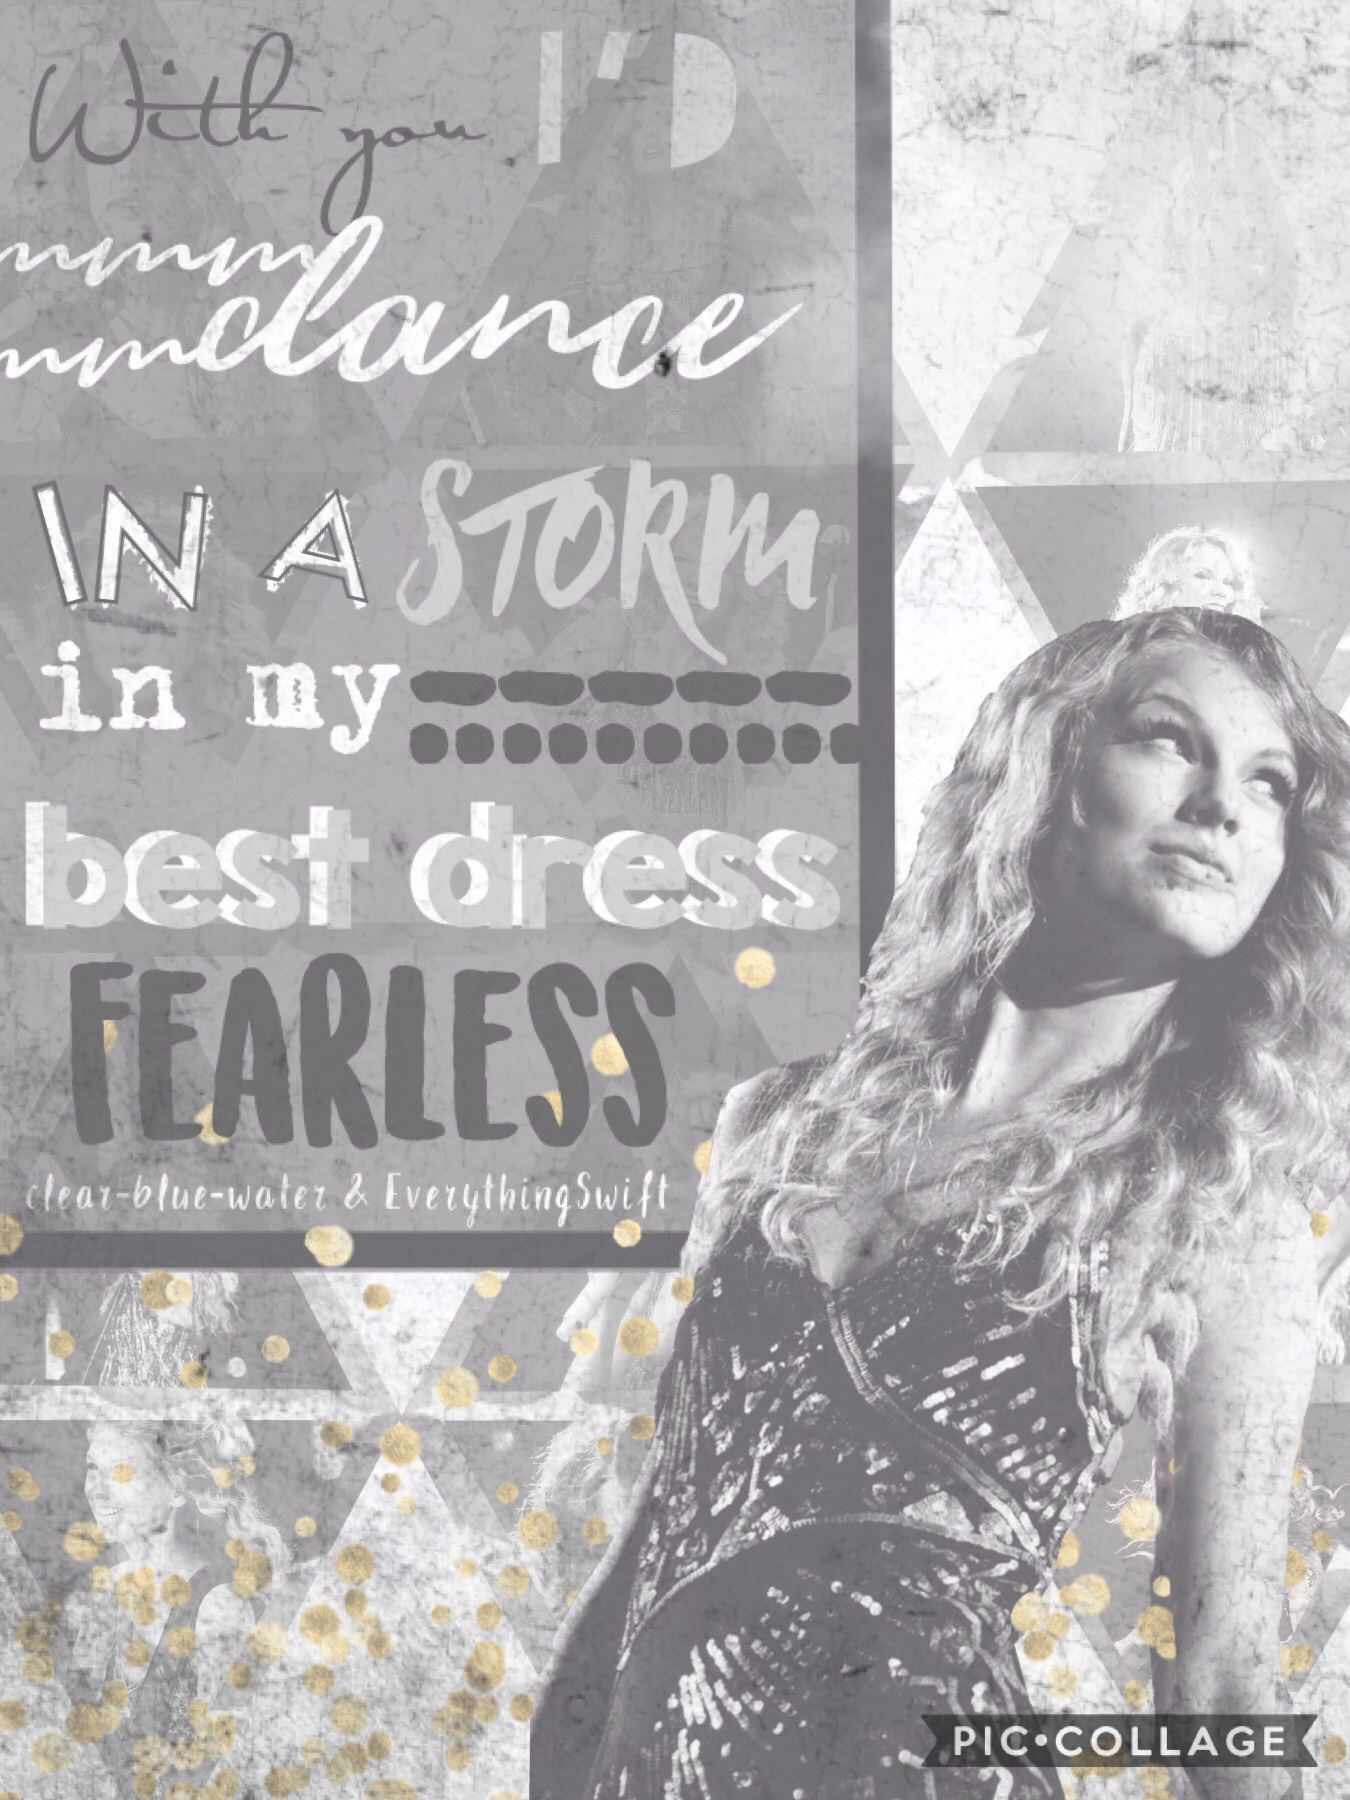 Collab with the fabulous...
EverythingSwfit for the 10th birthday of Fearless. I know it was technically last Sunday, but we were a little slow making it. it did BG and quote and she did pngs and text.
QOTD: How long have you been a Swiftie?
AOTD: Since 2